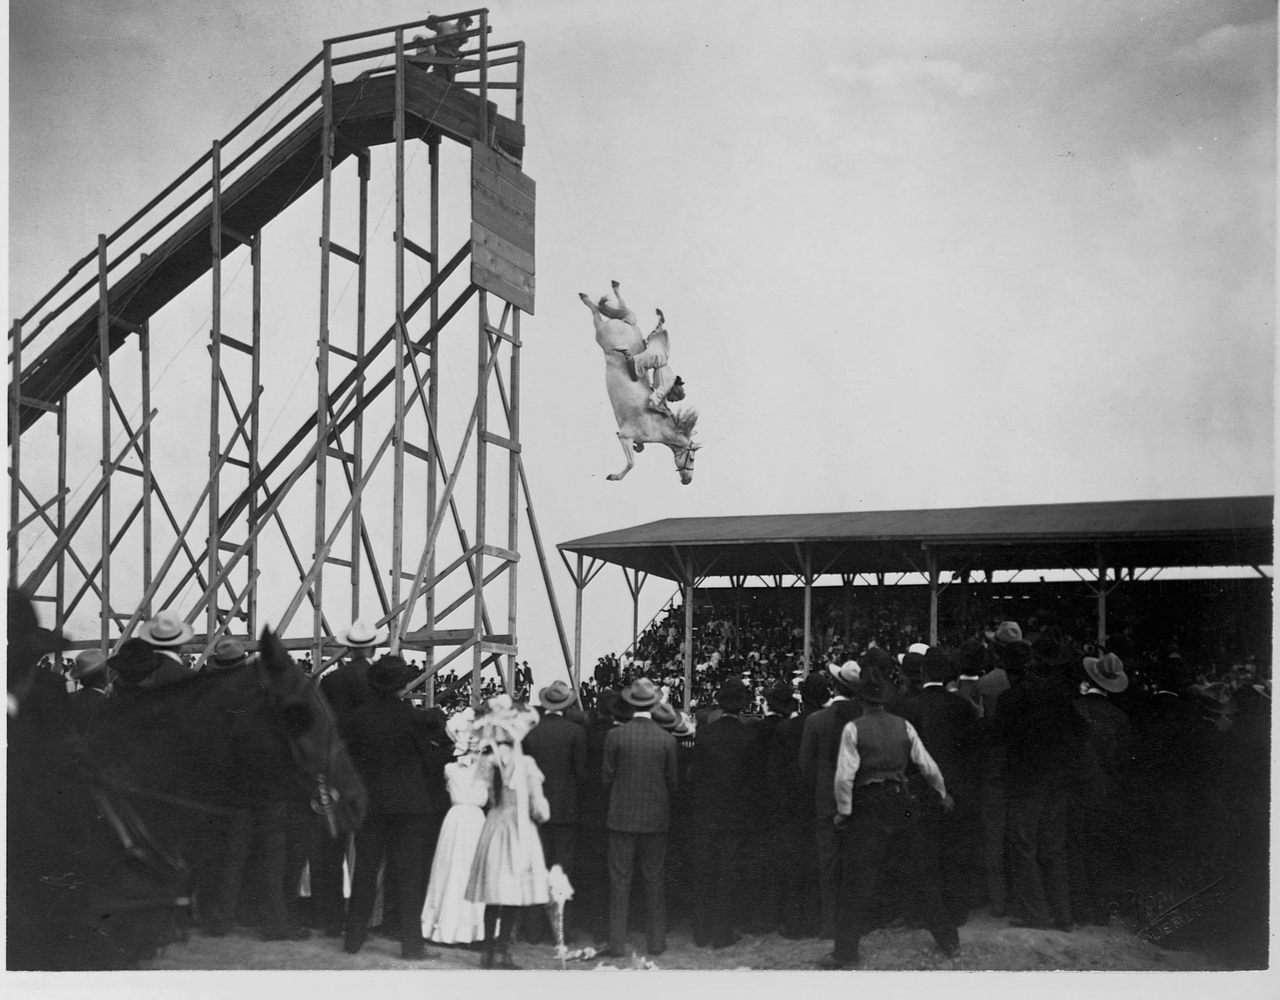 Eunice Winkless diving at the Steel Pier.